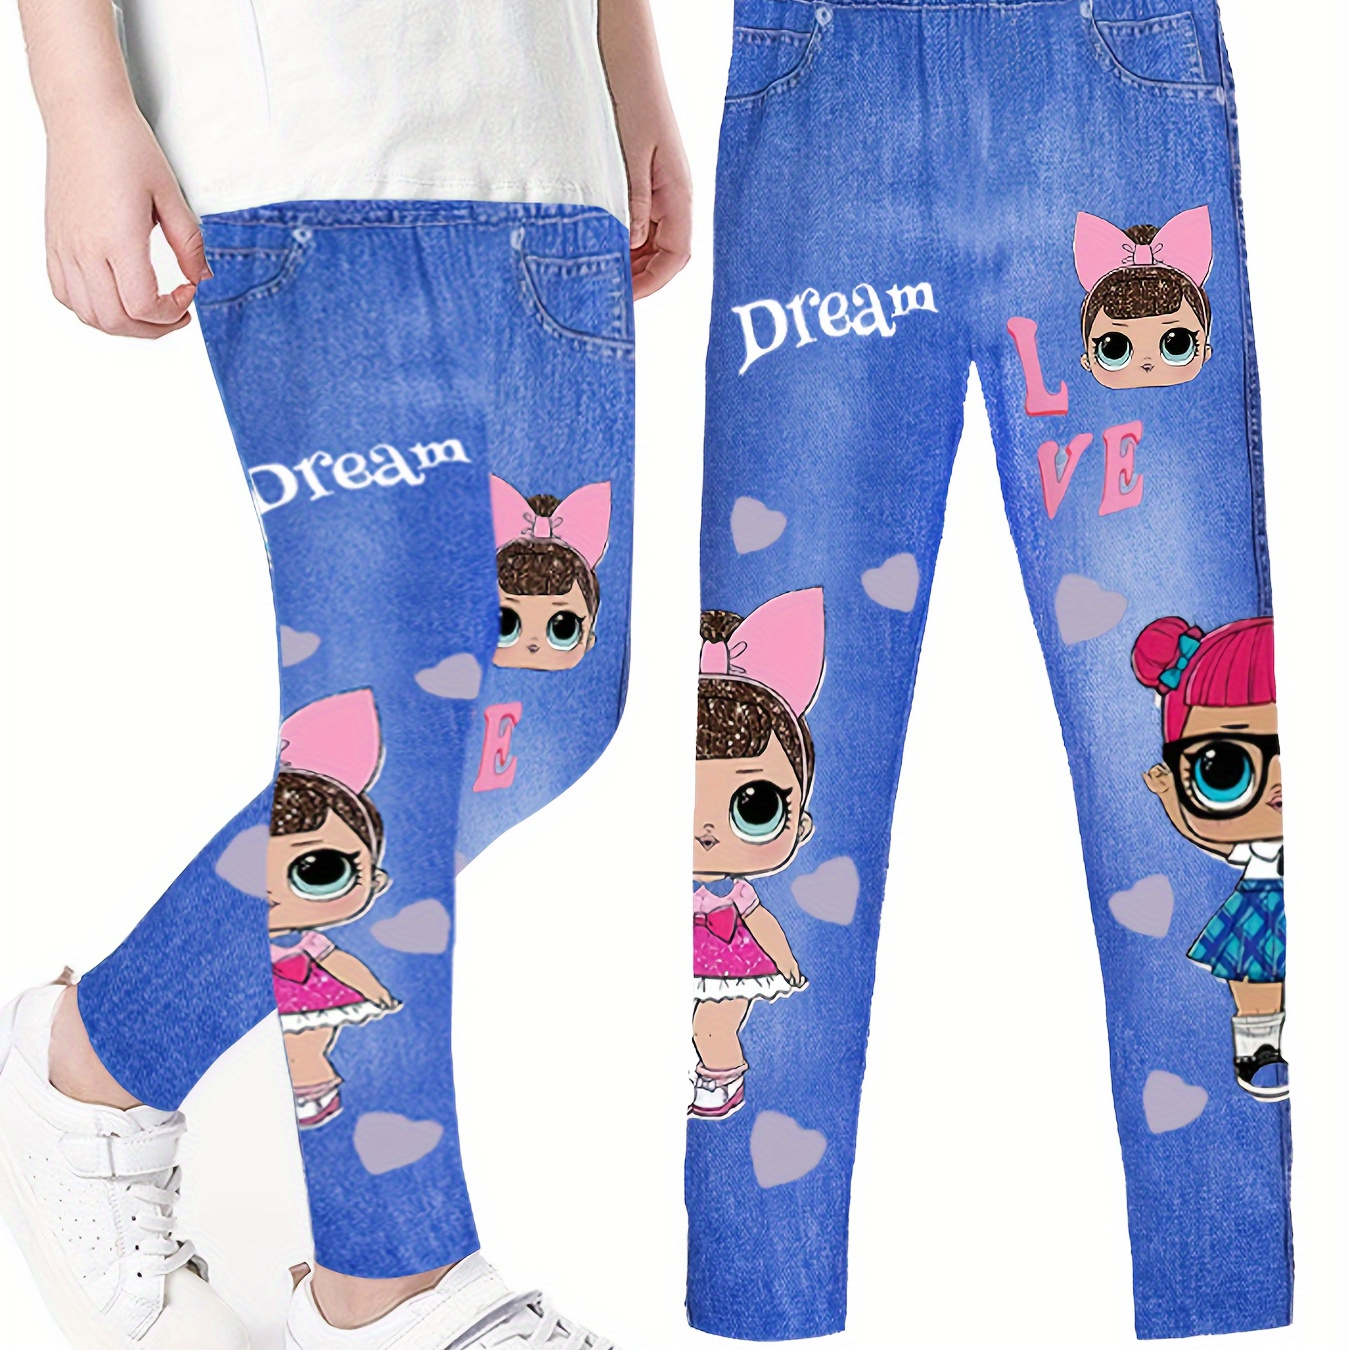 

Girl's Cartoon Girls Pattern Imitation Denim Print Trousers With Pockets, Causal Breathable Slightly Stretch Pants For City Walk Street Hanging Outdoor Activities